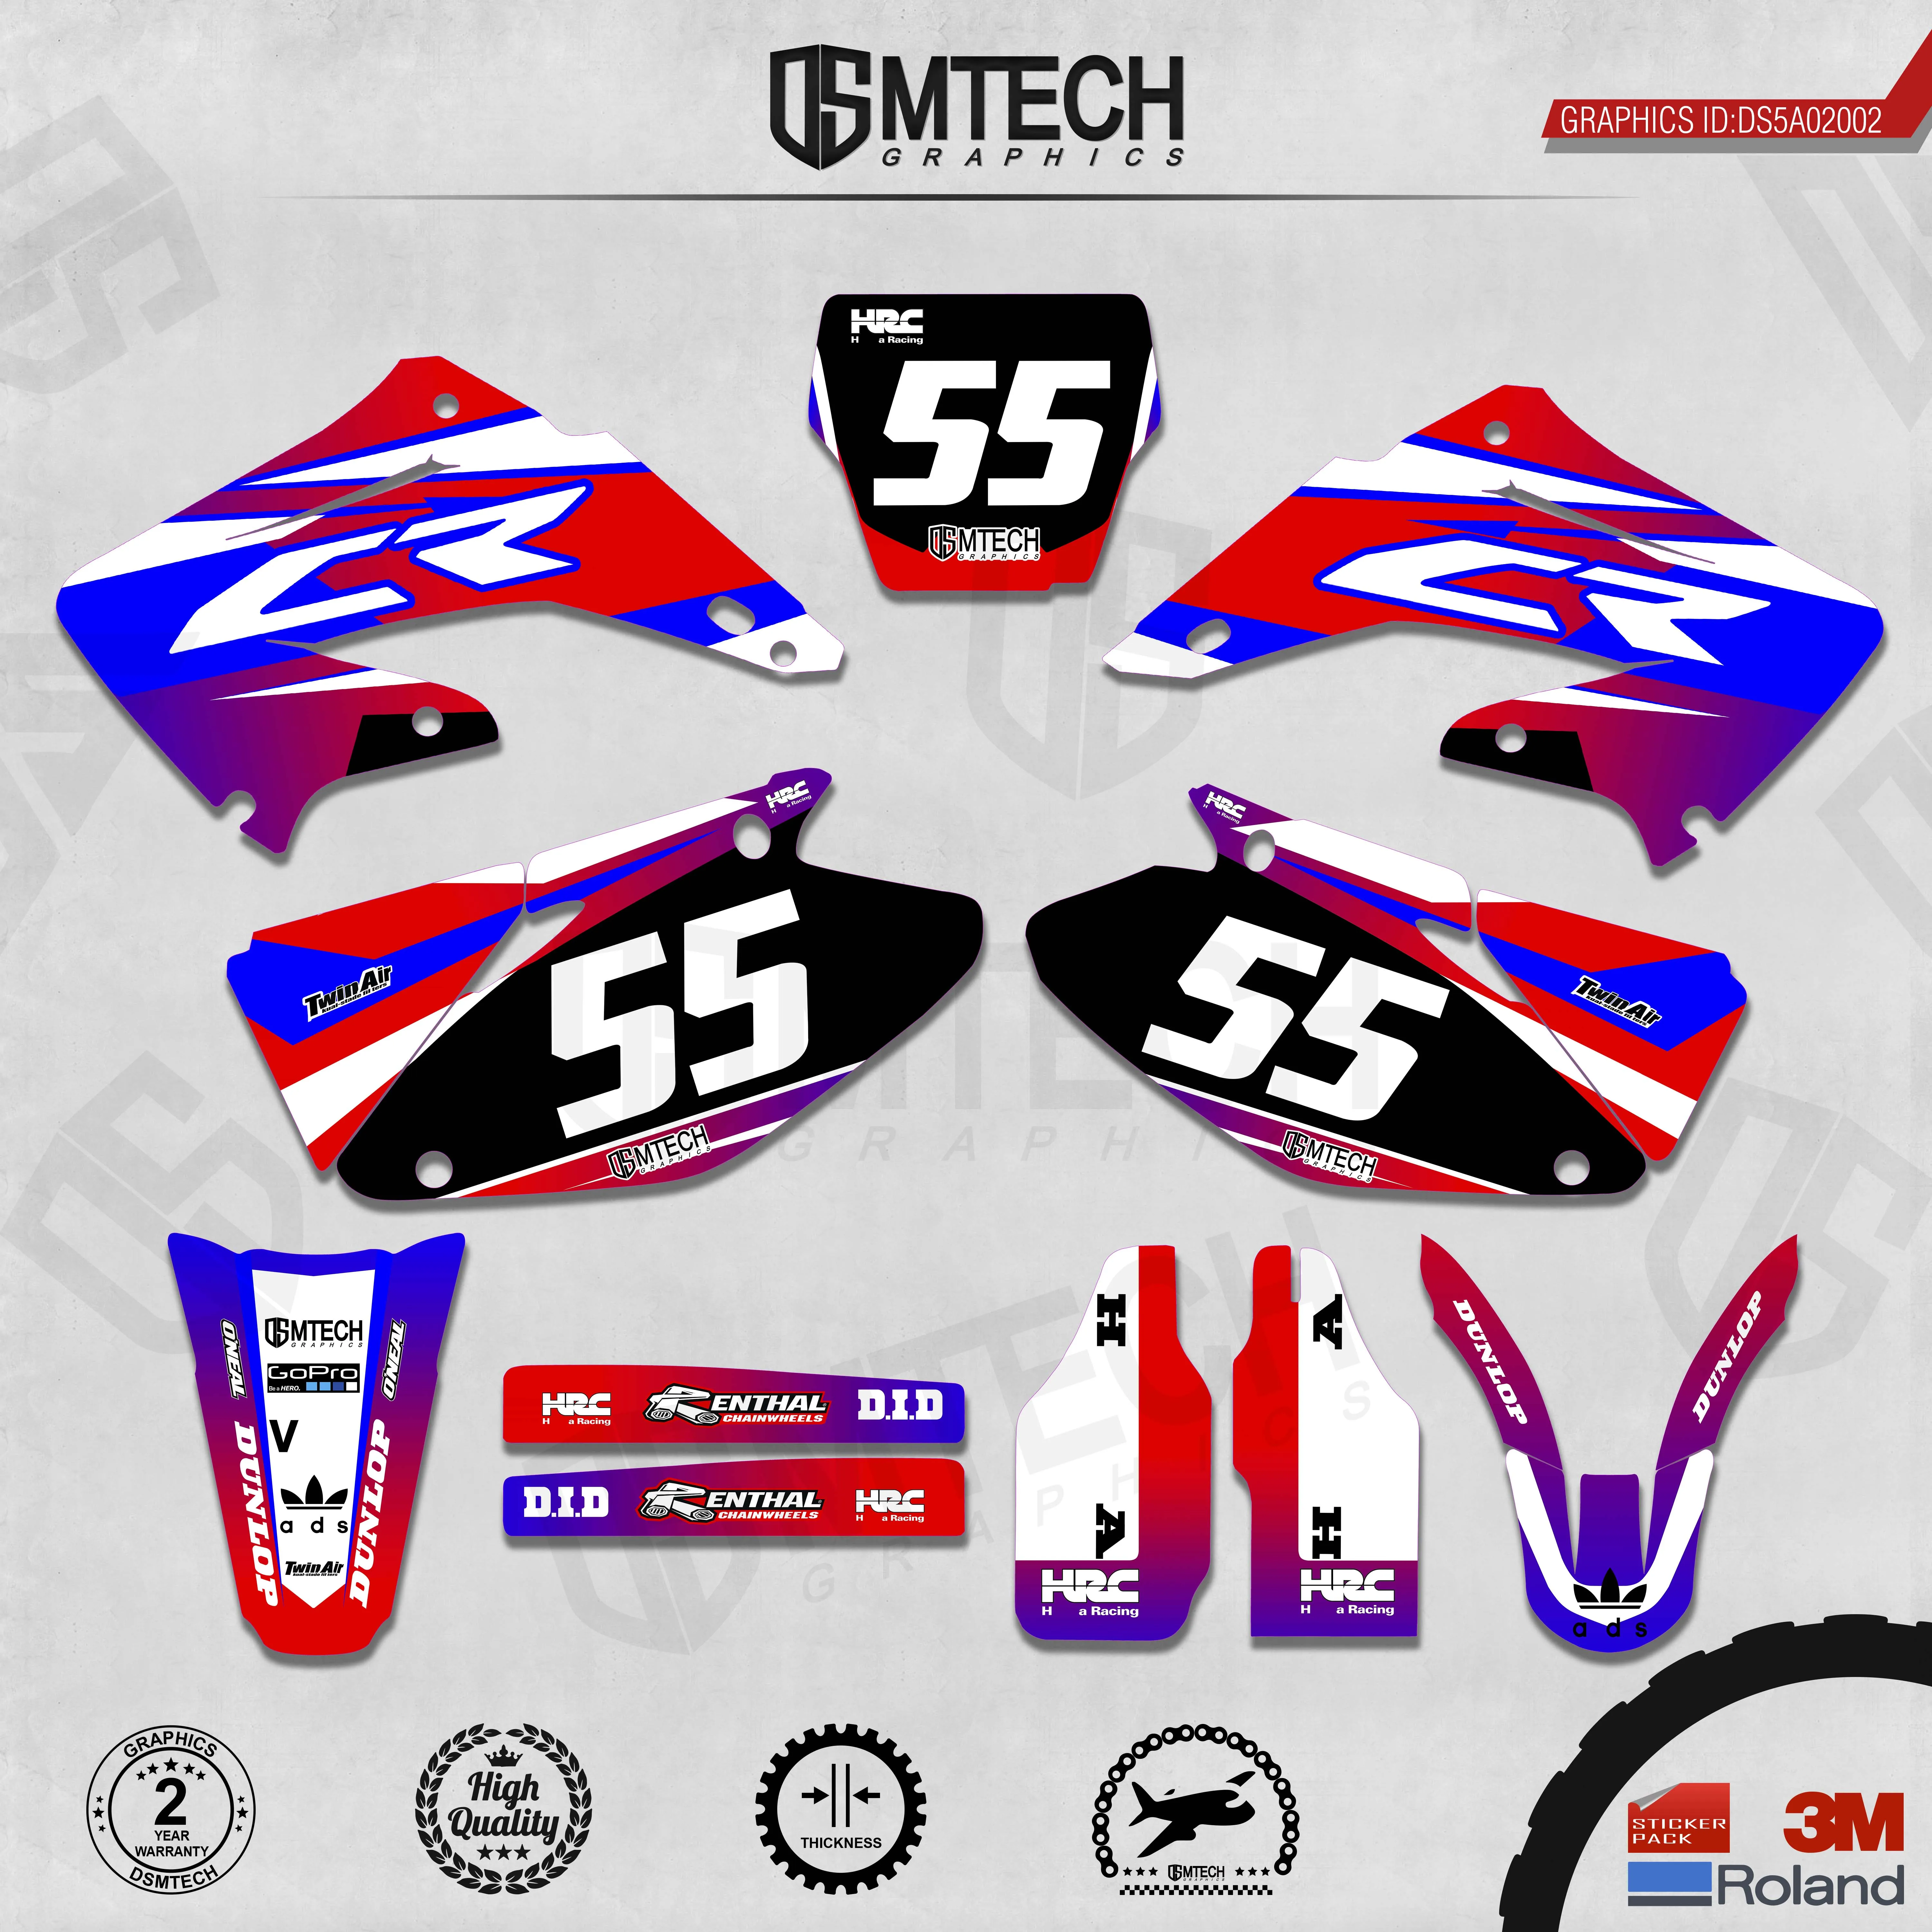 DSMTECH Customized Team Graphics Backgrounds Decals 3M Custom Stickers For 2002-2004 2005-2007 2008-2010 2011-2012 CR125-250 002